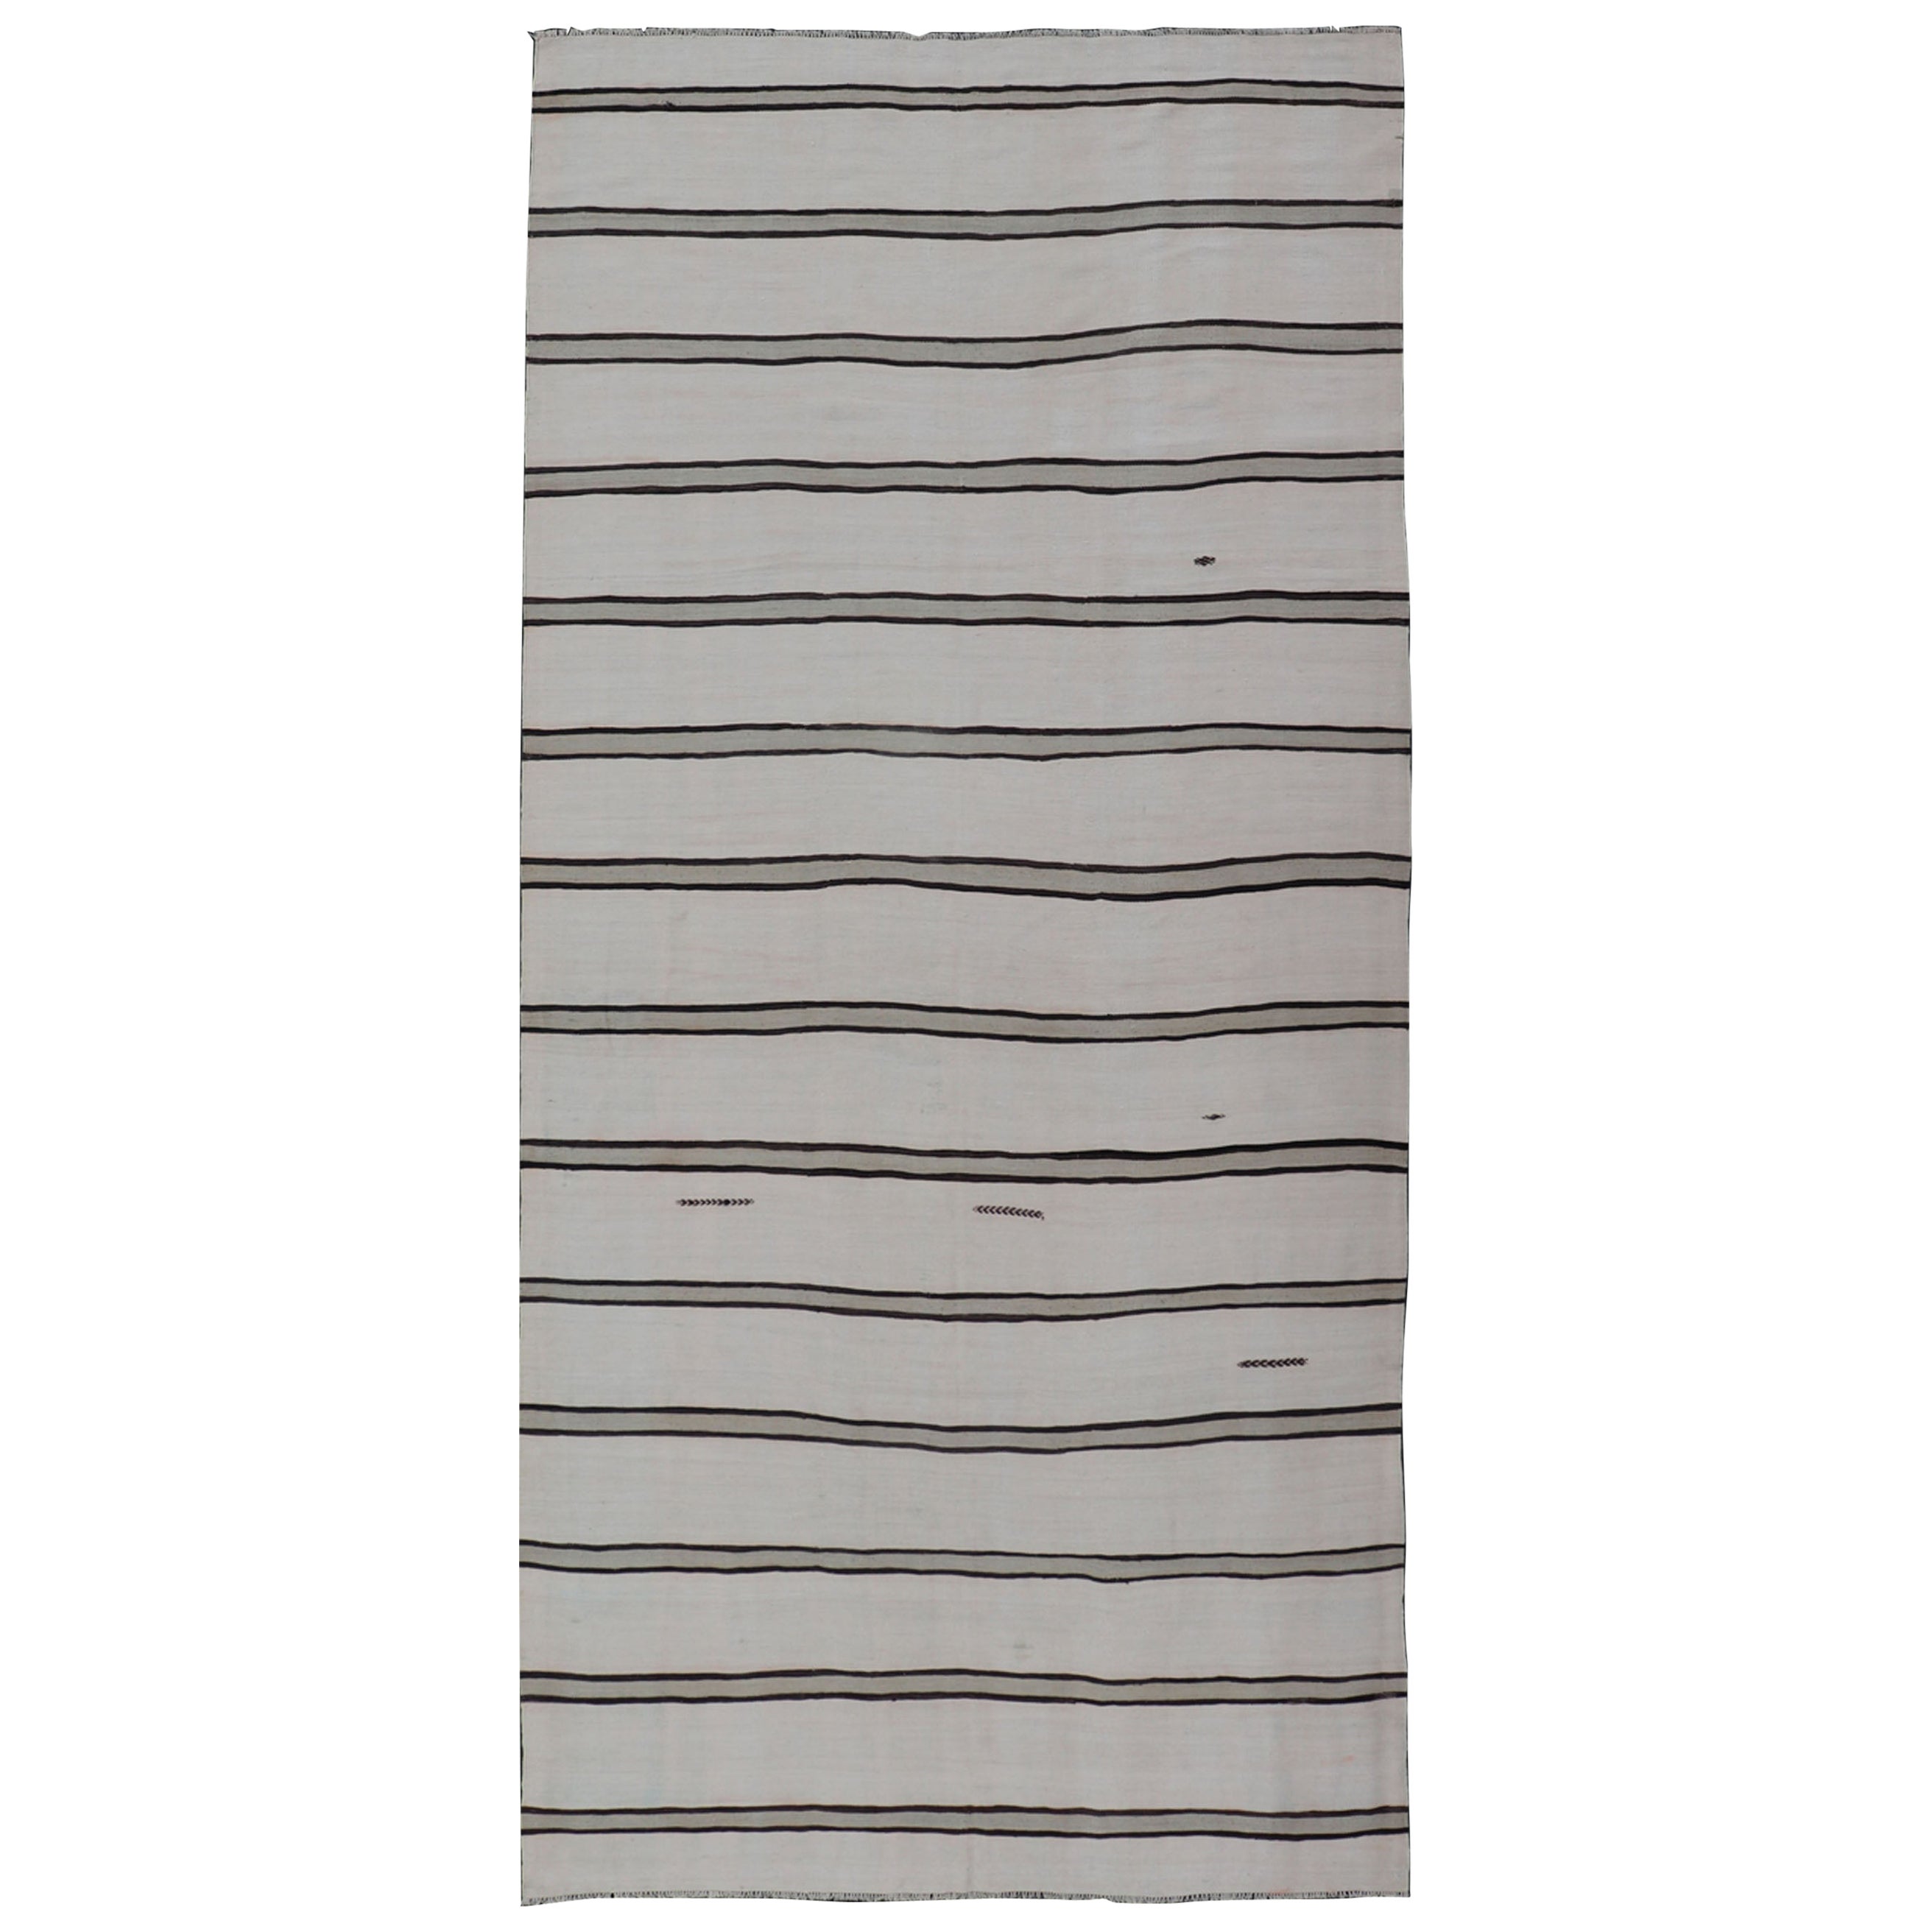 Turkish Vintage Gallery Flat-Weave in Brown, Gray, And Ivory with Stripe Design